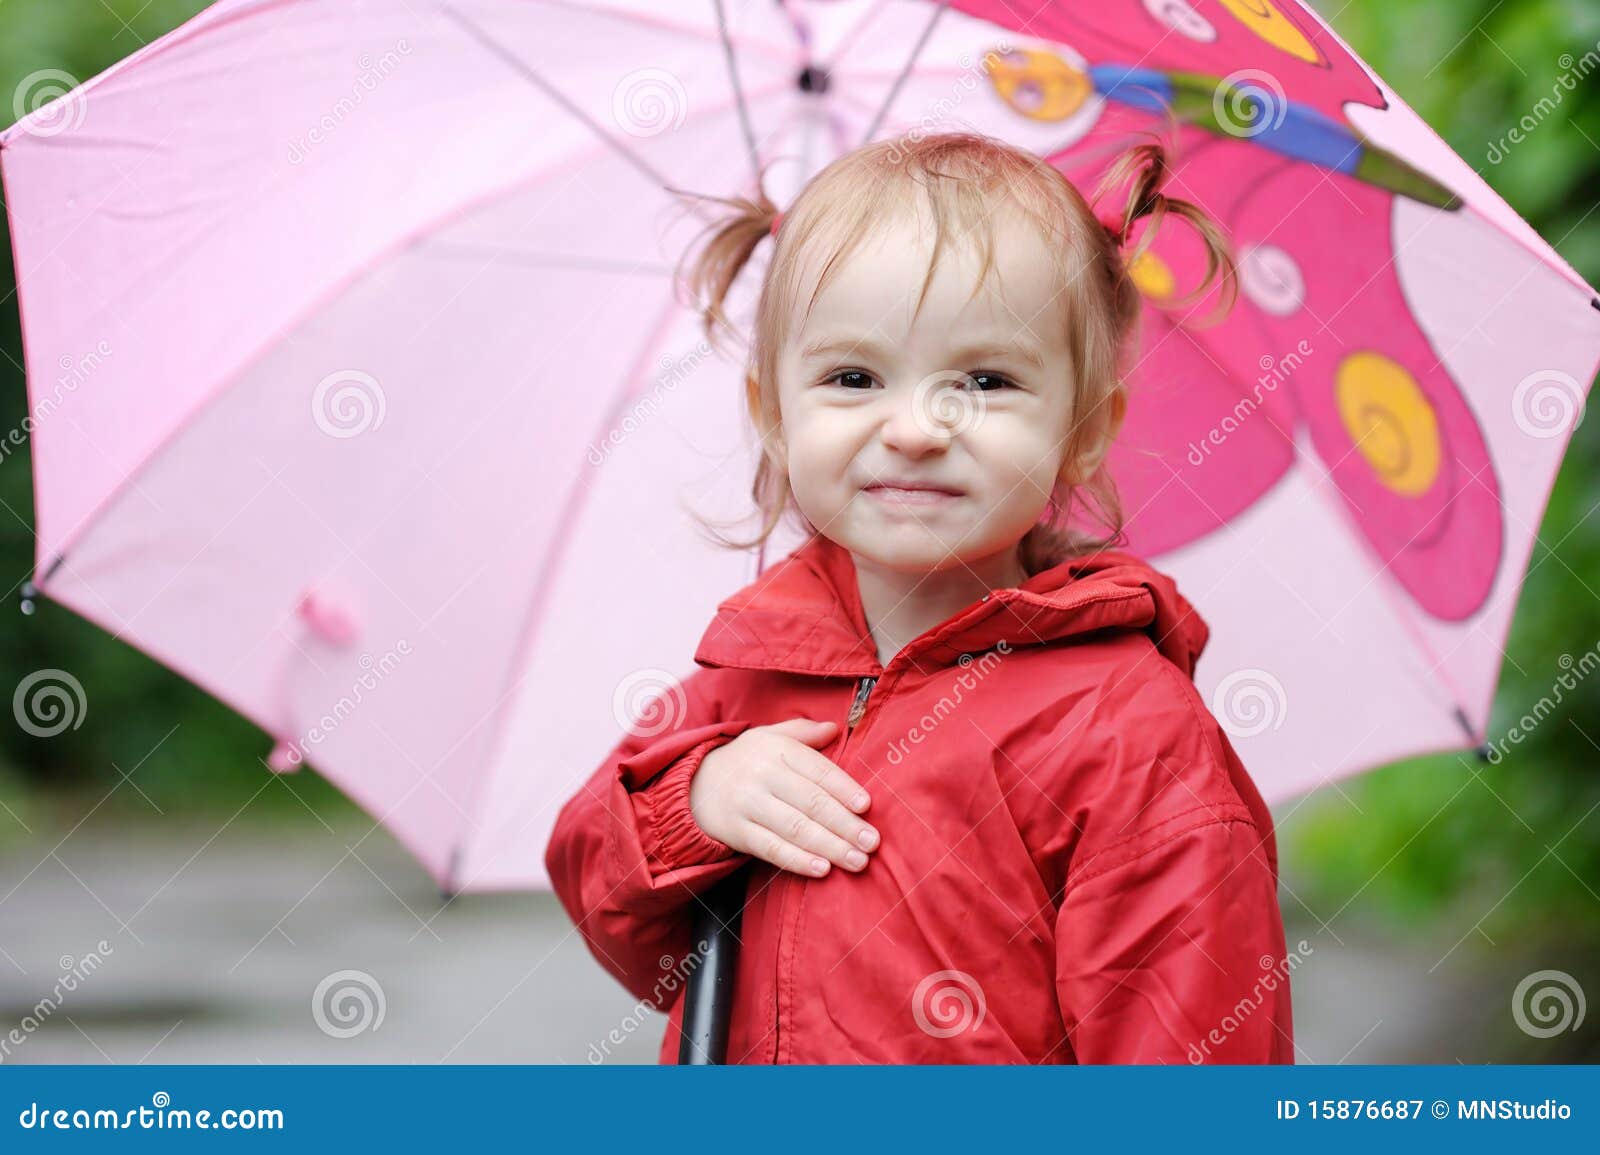 Adorable Toddler Girl at Rainy Day Stock Image - Image of springtime ...